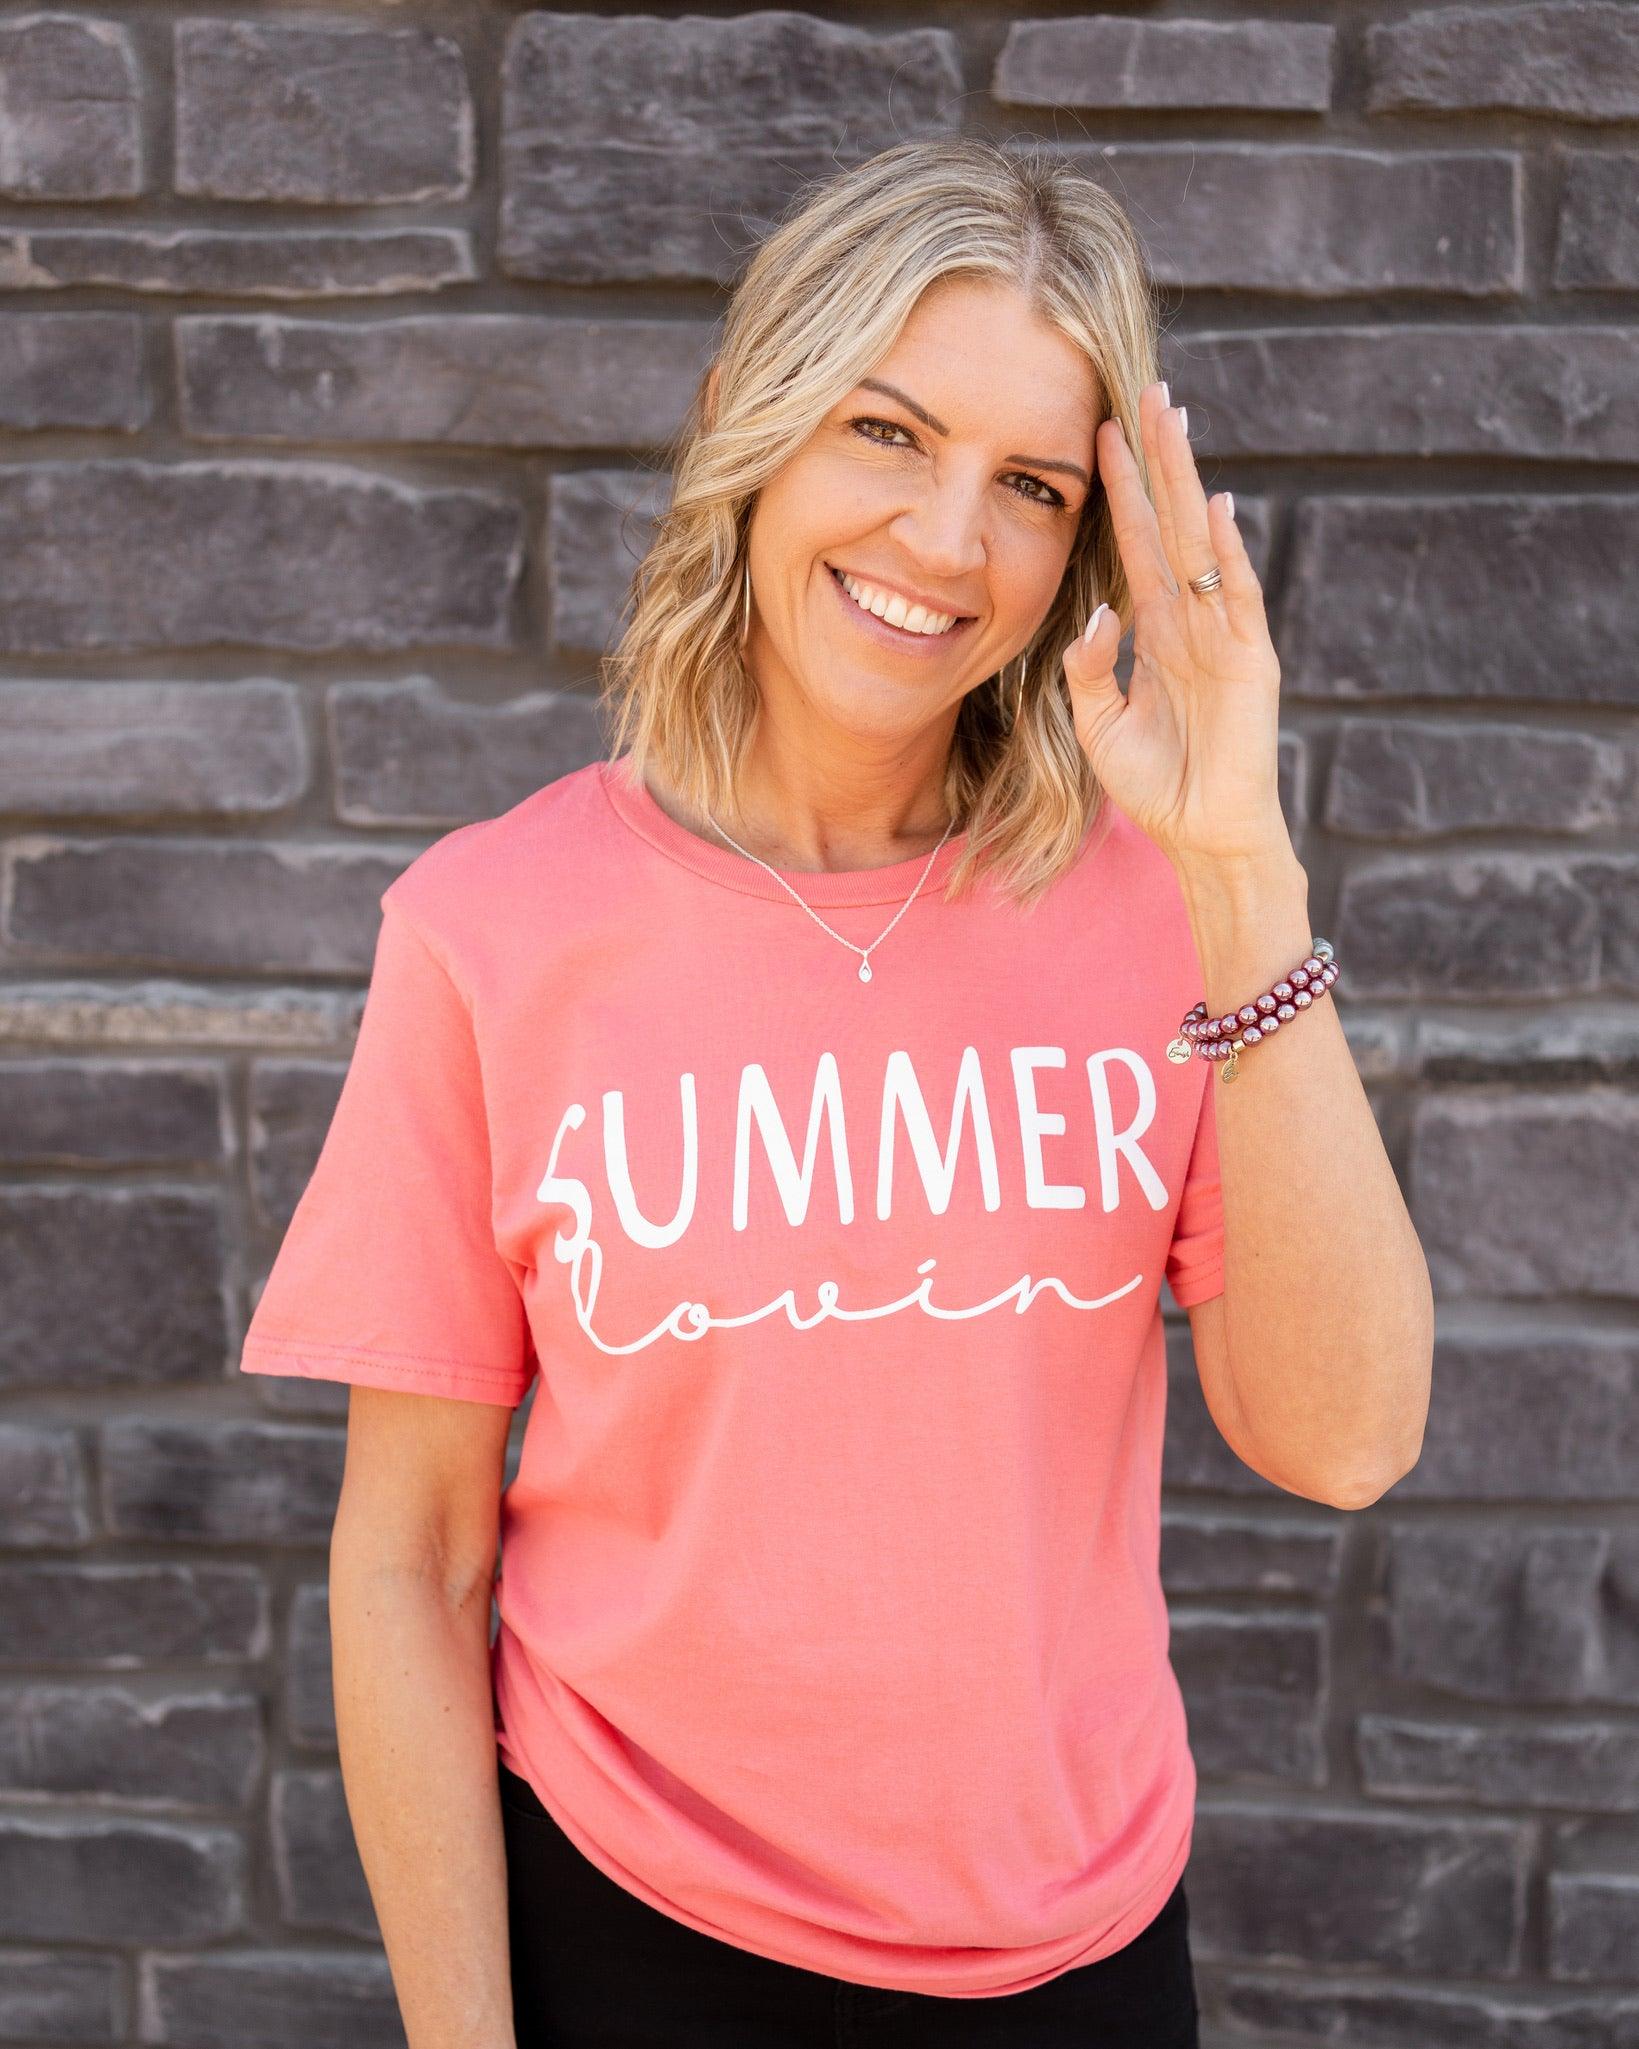 Summer Trend: The Graphic Tee